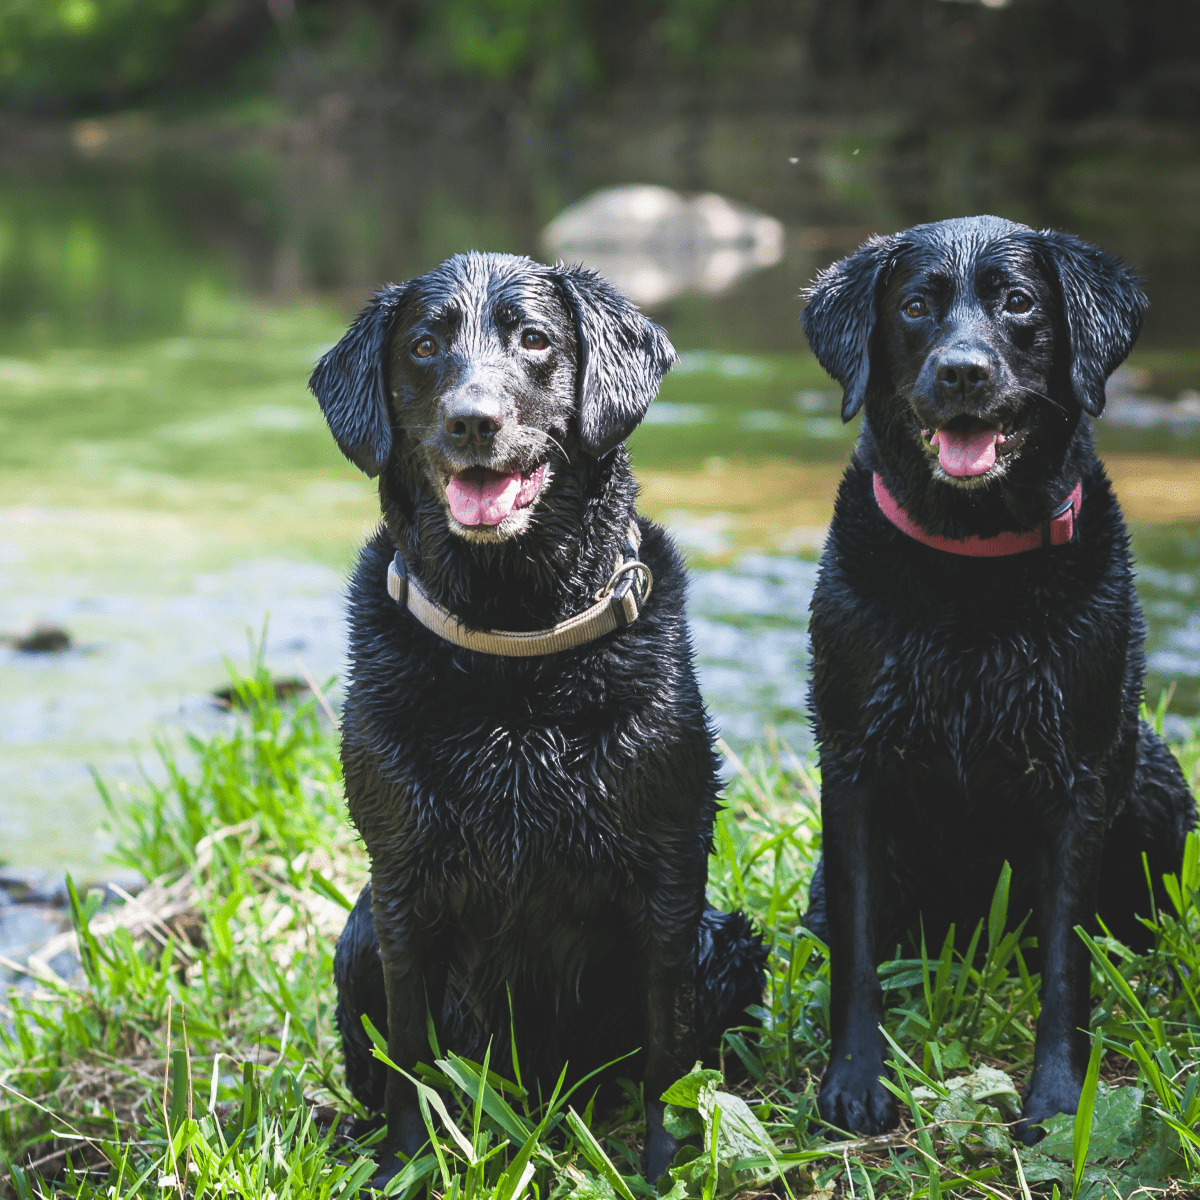 7 Ways to Train a Dog to Get Along With Other Dogs